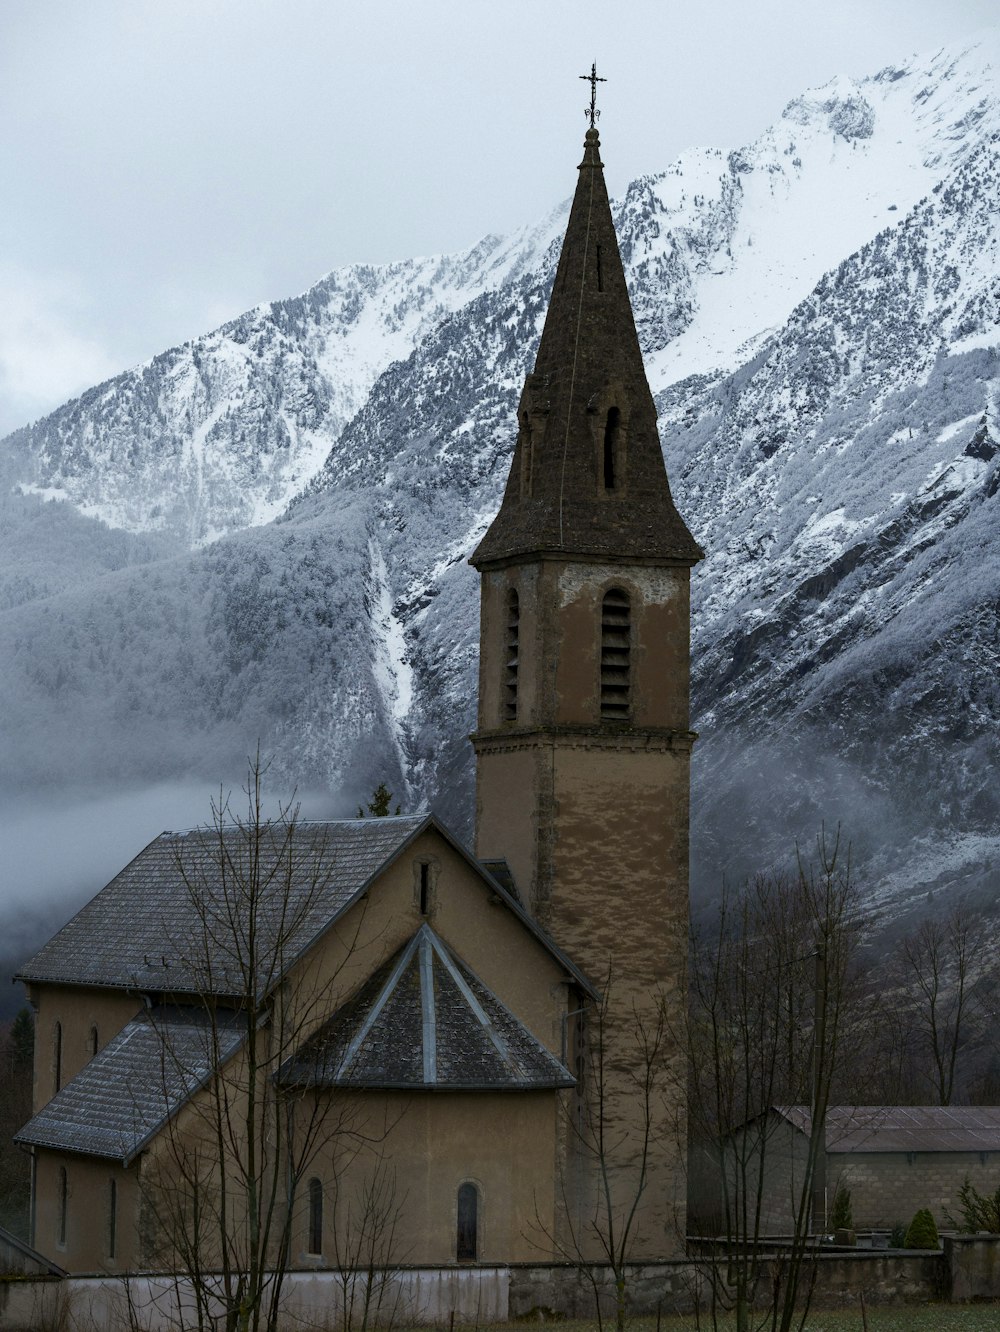 a church with a steeple in front of a snowy mountain